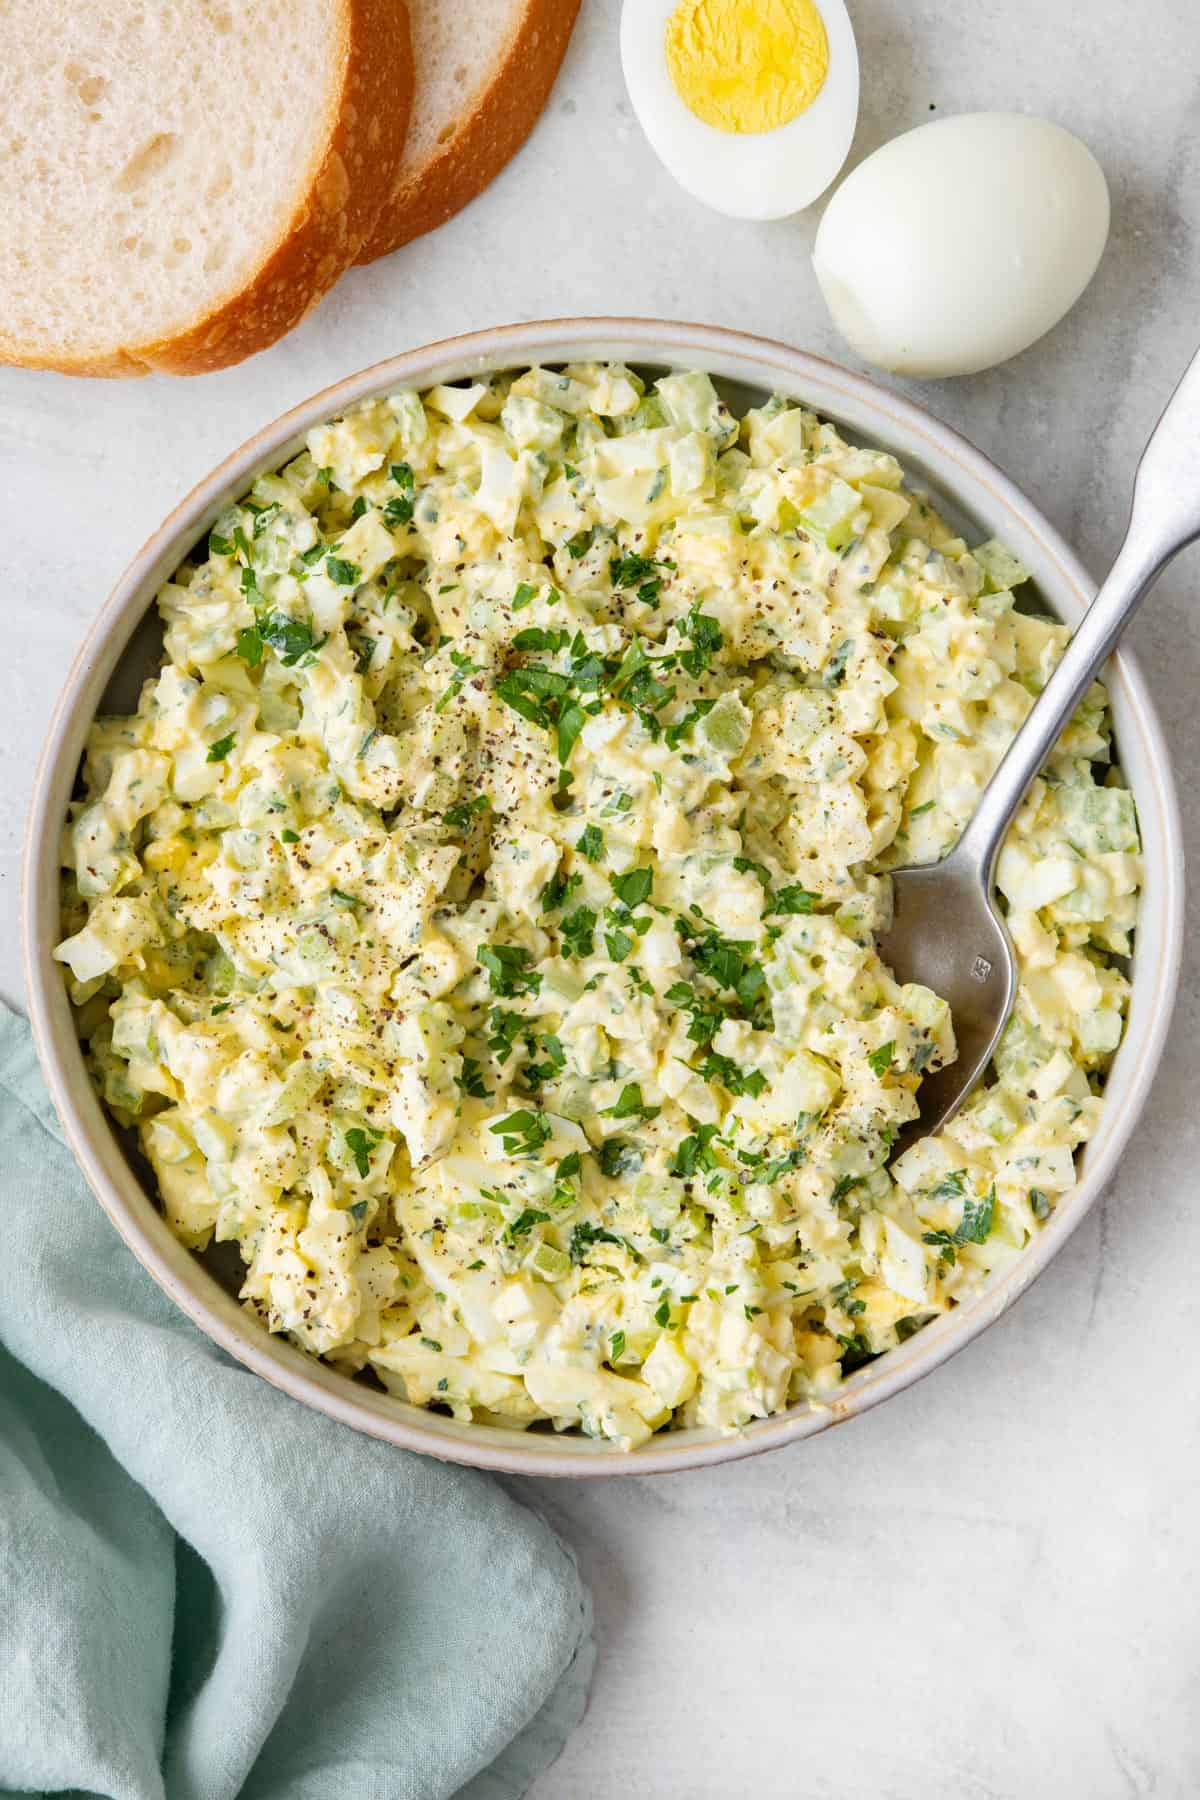 https://feelgoodfoodie.net/wp-content/uploads/2023/04/Healthy-Egg-Salad-06.jpg